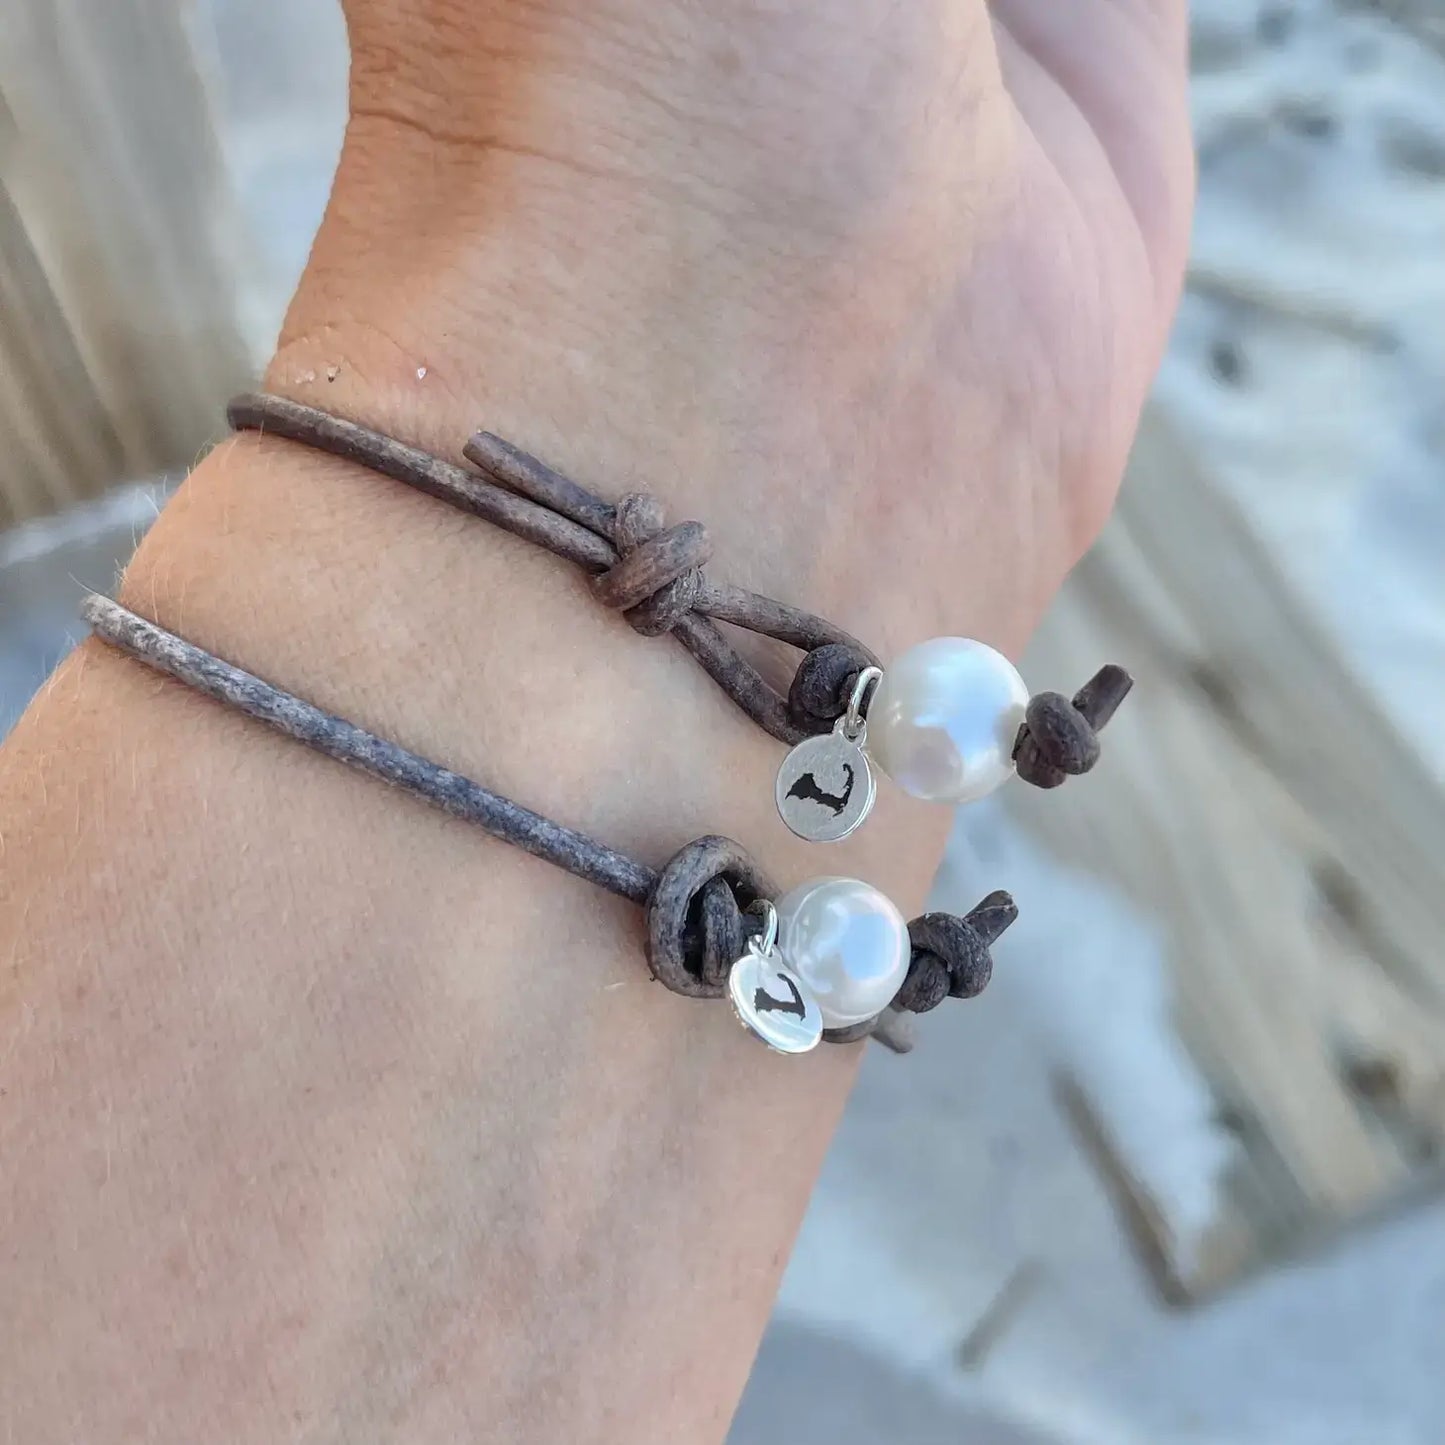 Recycled Sea Glass Leather Bracelet: 7.5" / Assortment